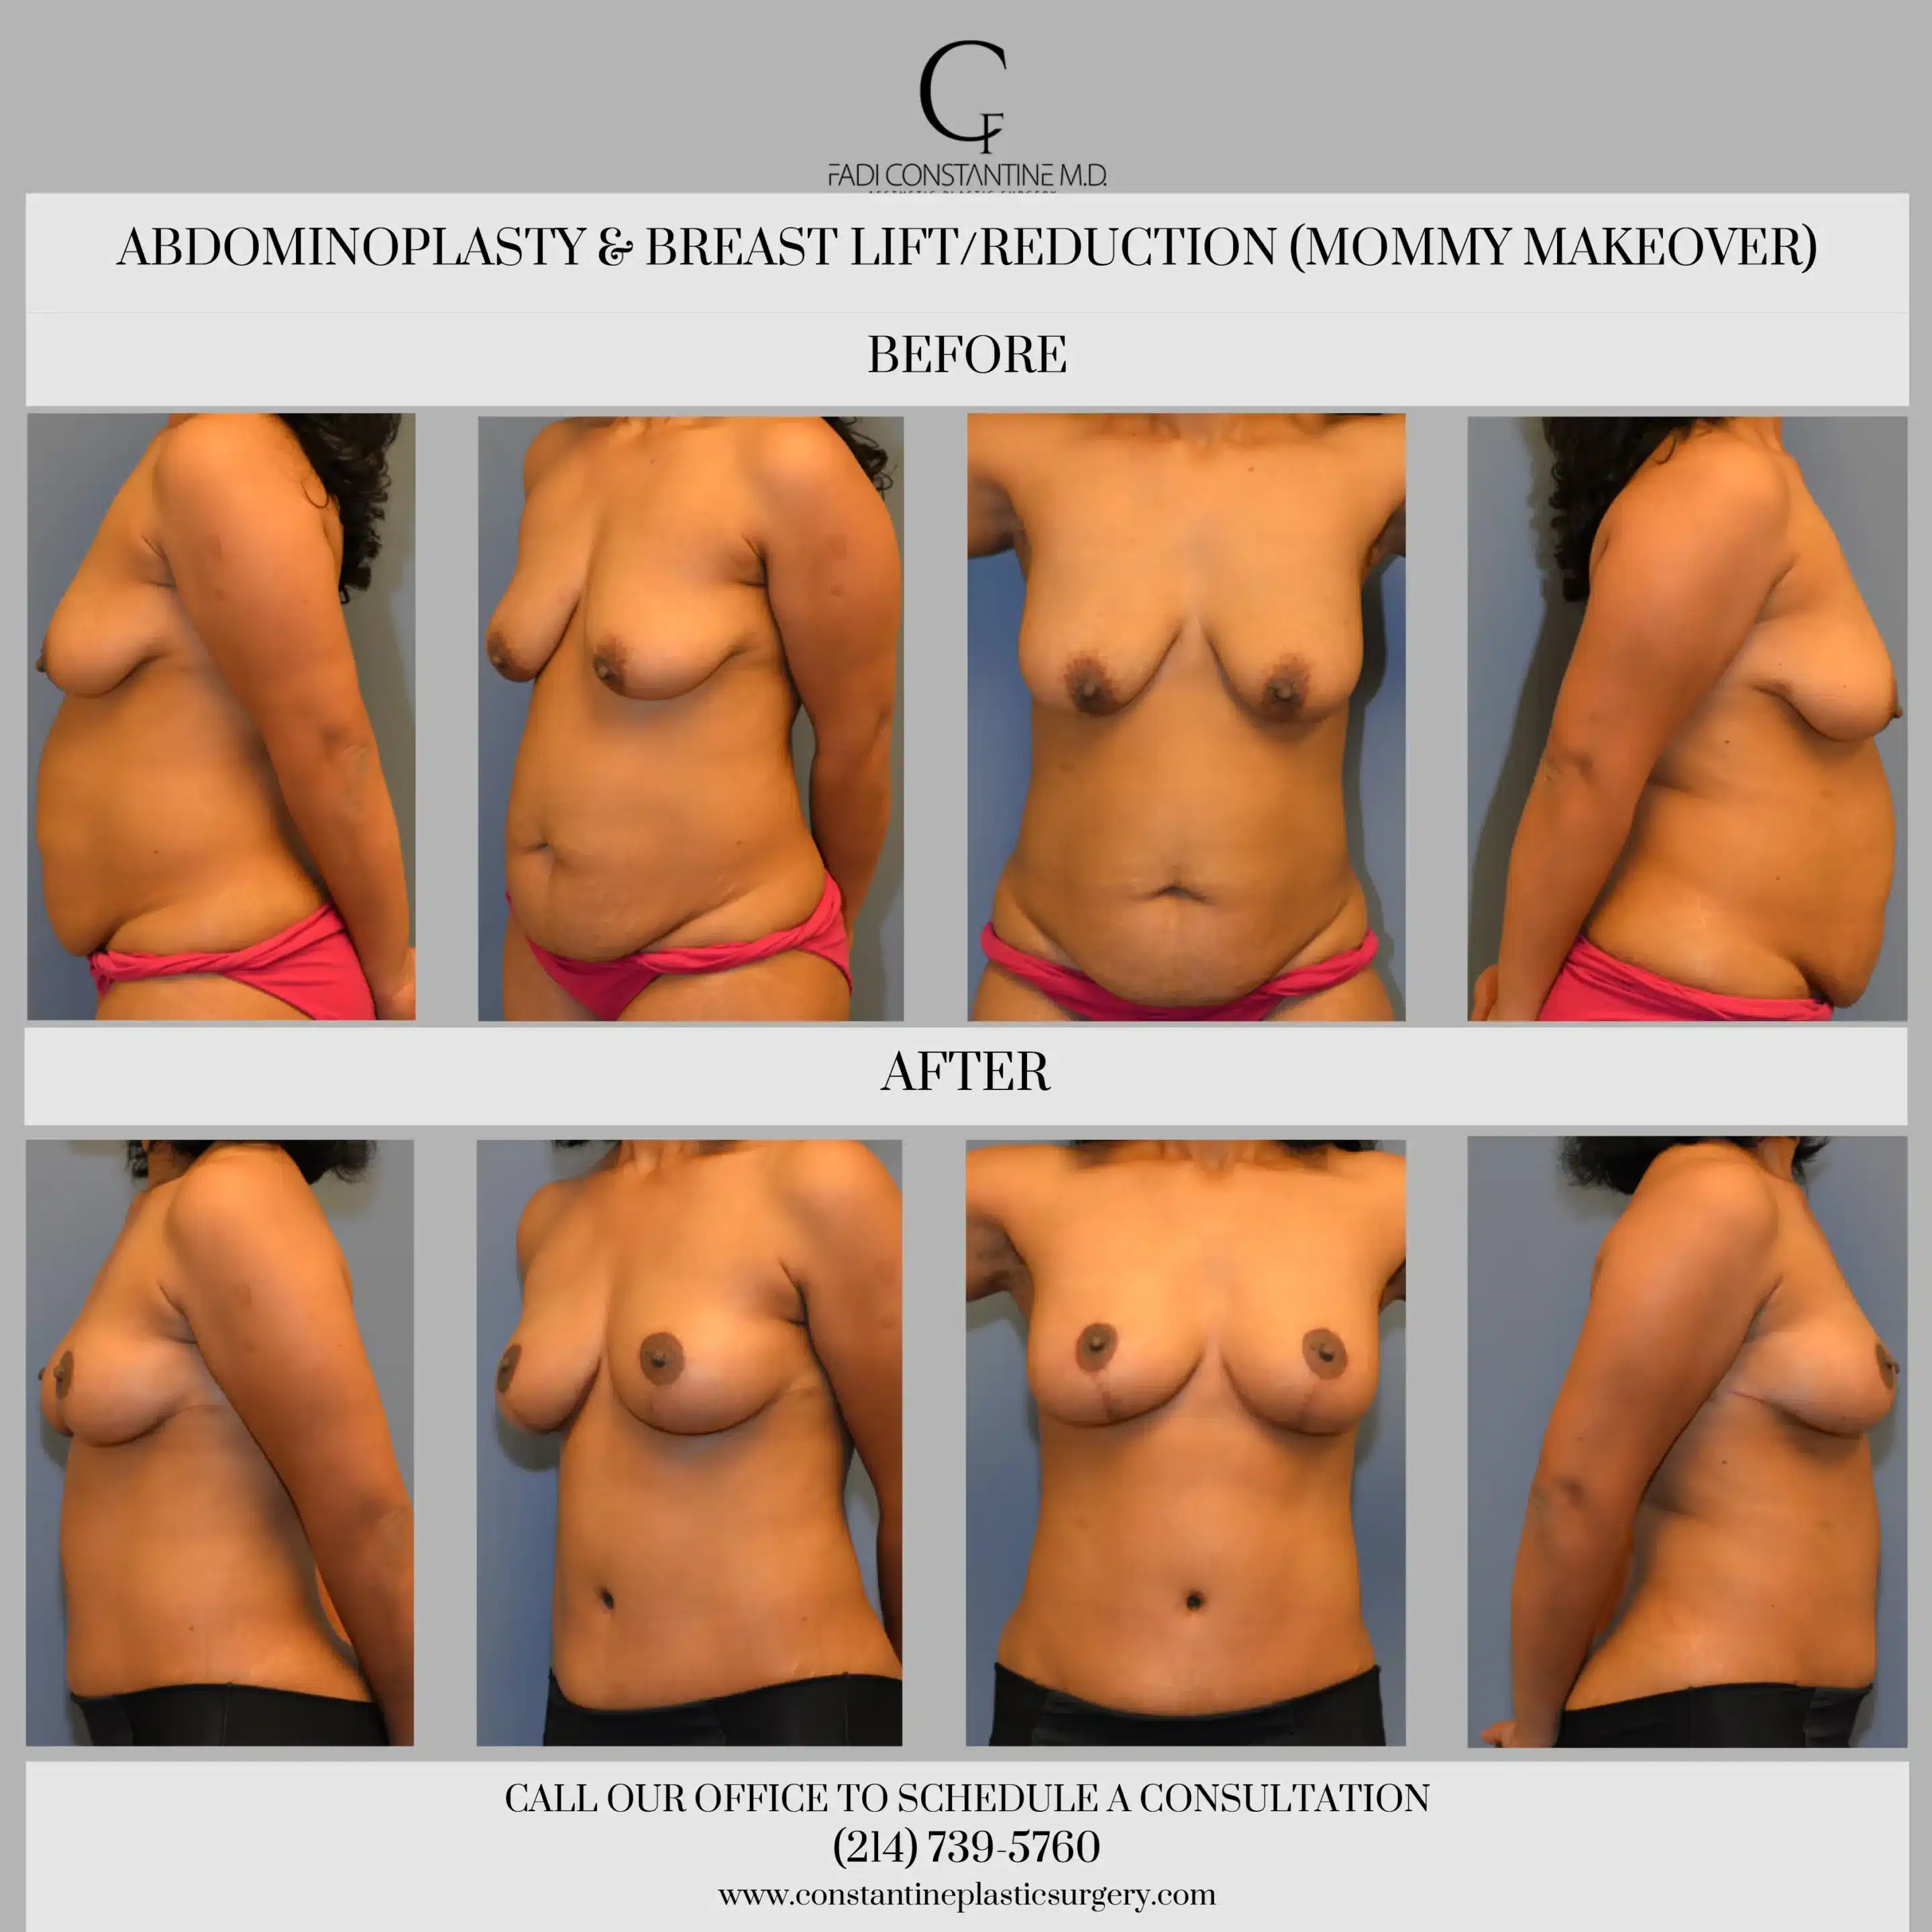 How Long Does A Breast Lift Last?